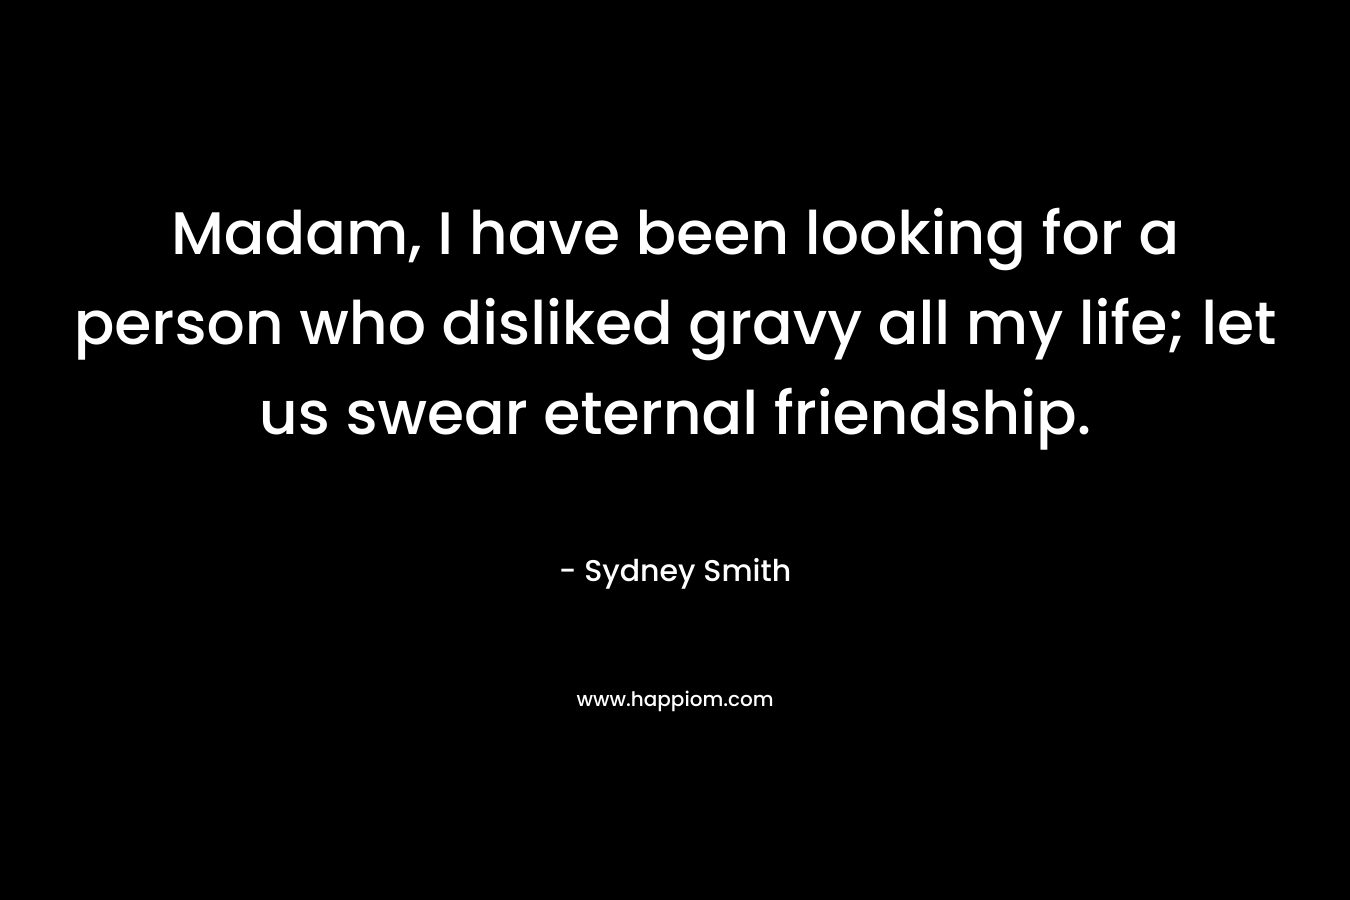 Madam, I have been looking for a person who disliked gravy all my life; let us swear eternal friendship. – Sydney Smith